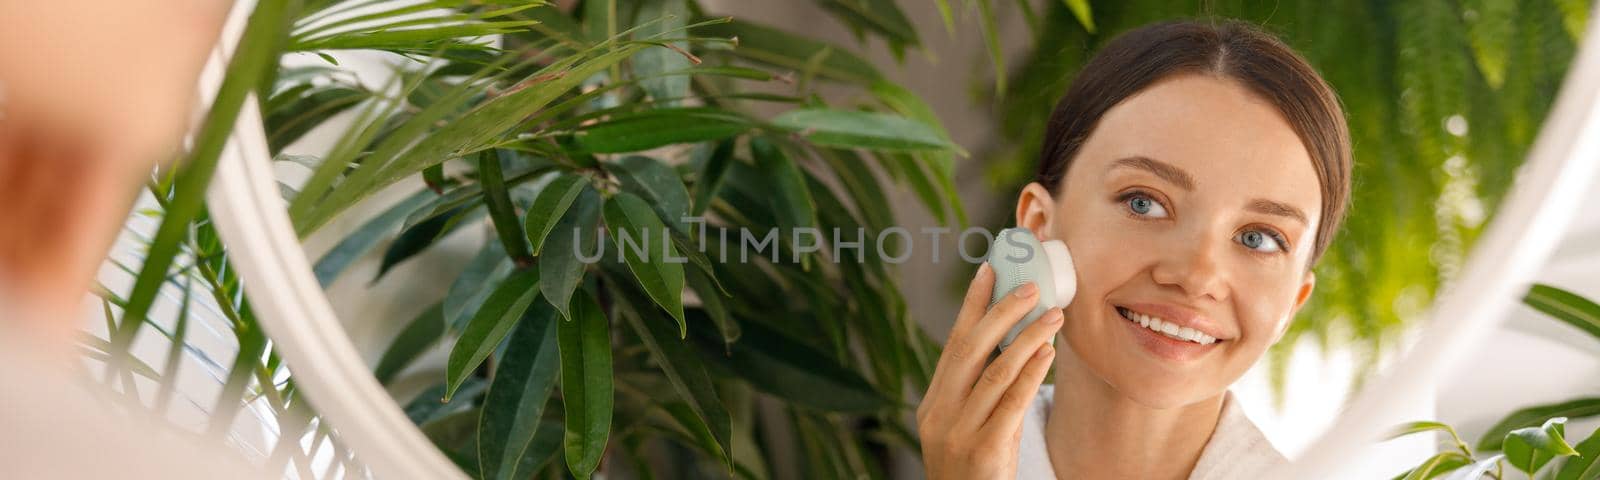 Portrait of young woman joyfully looking at herself in the mirror while cleansing her skin using silicone face brush in the bathroom decorated with green plants. Beauty, skincare, spa concept